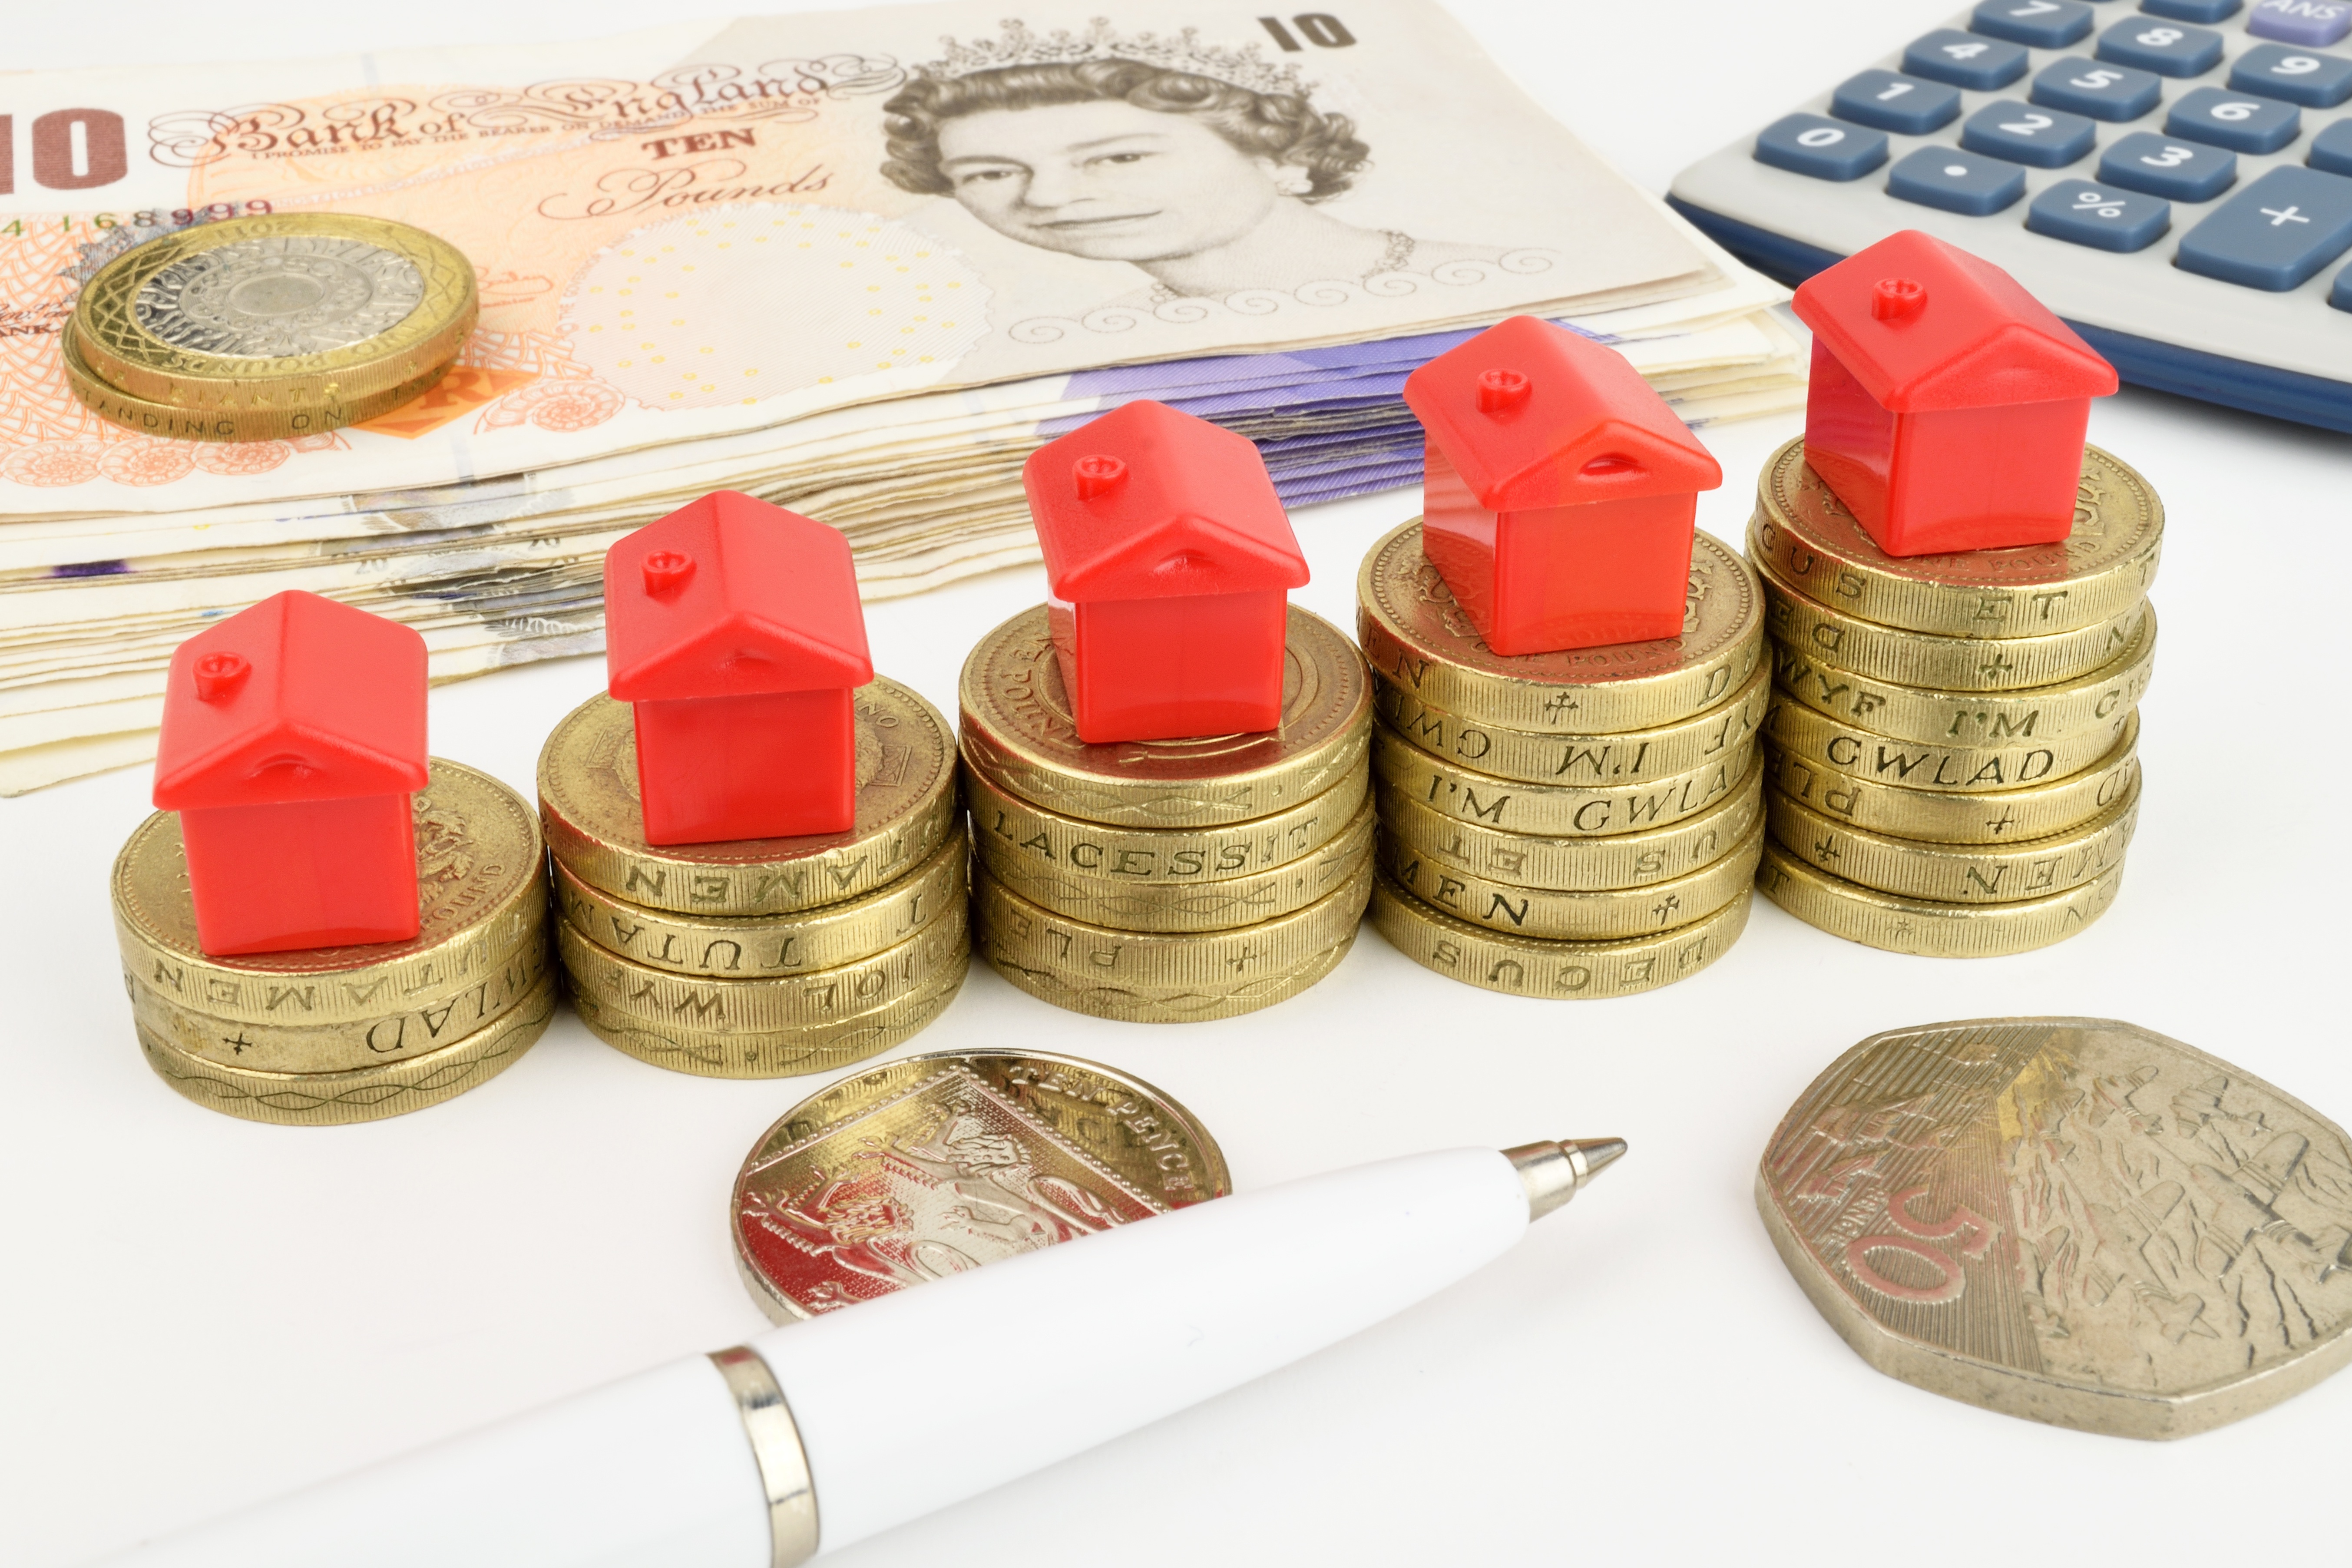 Buy-to-let landlords undeterred by stamp duty surcharge